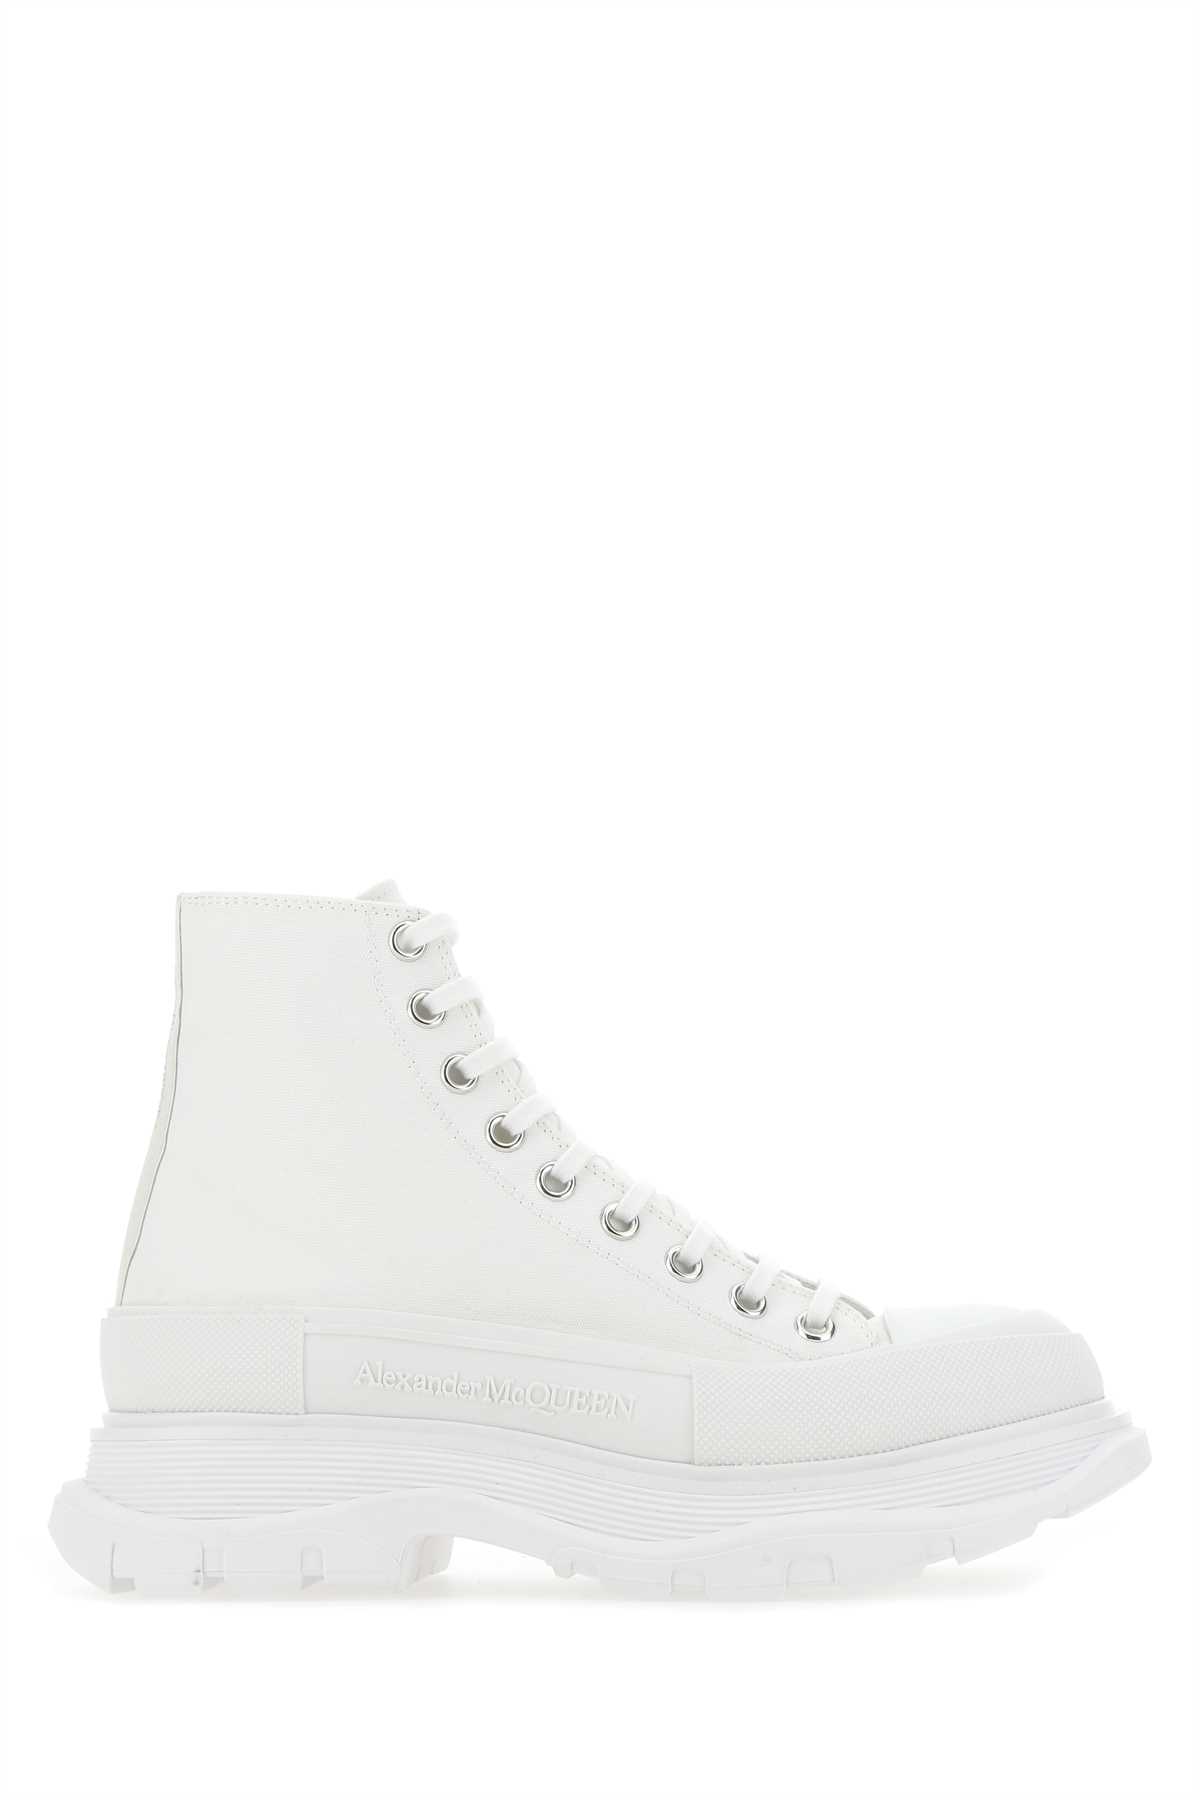 Alexander McQueen White Canvas And Rubber Tread Slick Sneakers